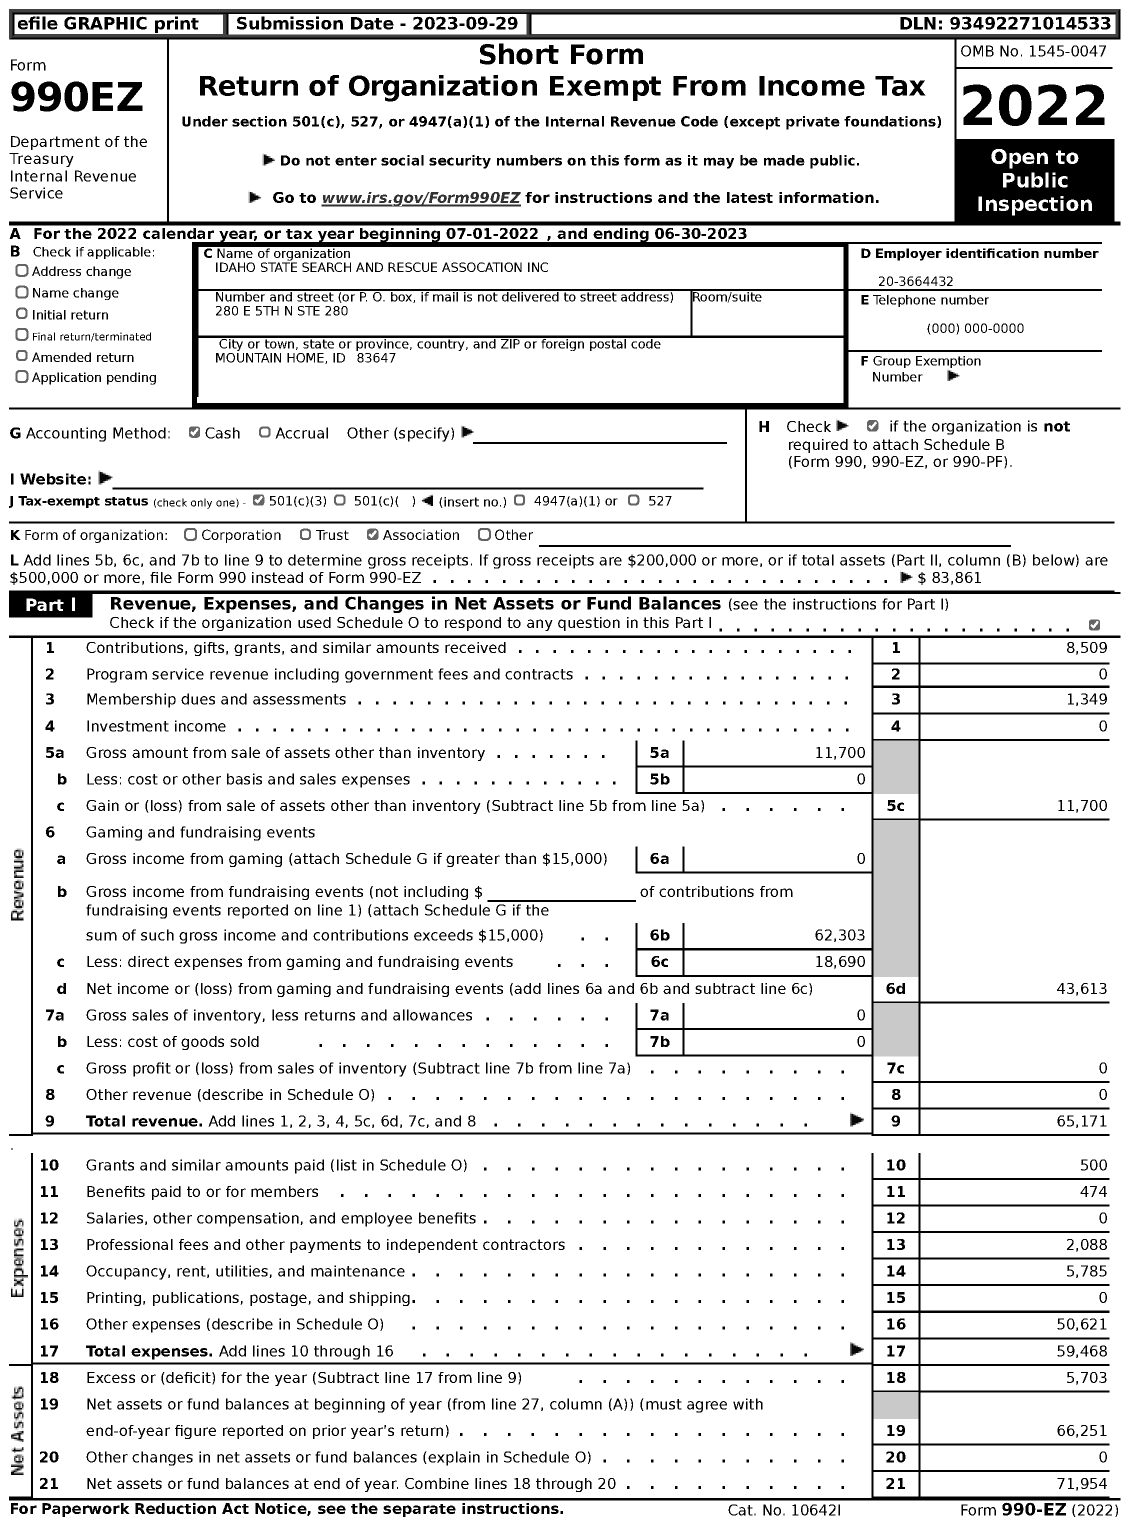 Image of first page of 2022 Form 990EZ for Idaho State Search and Rescue Assocation